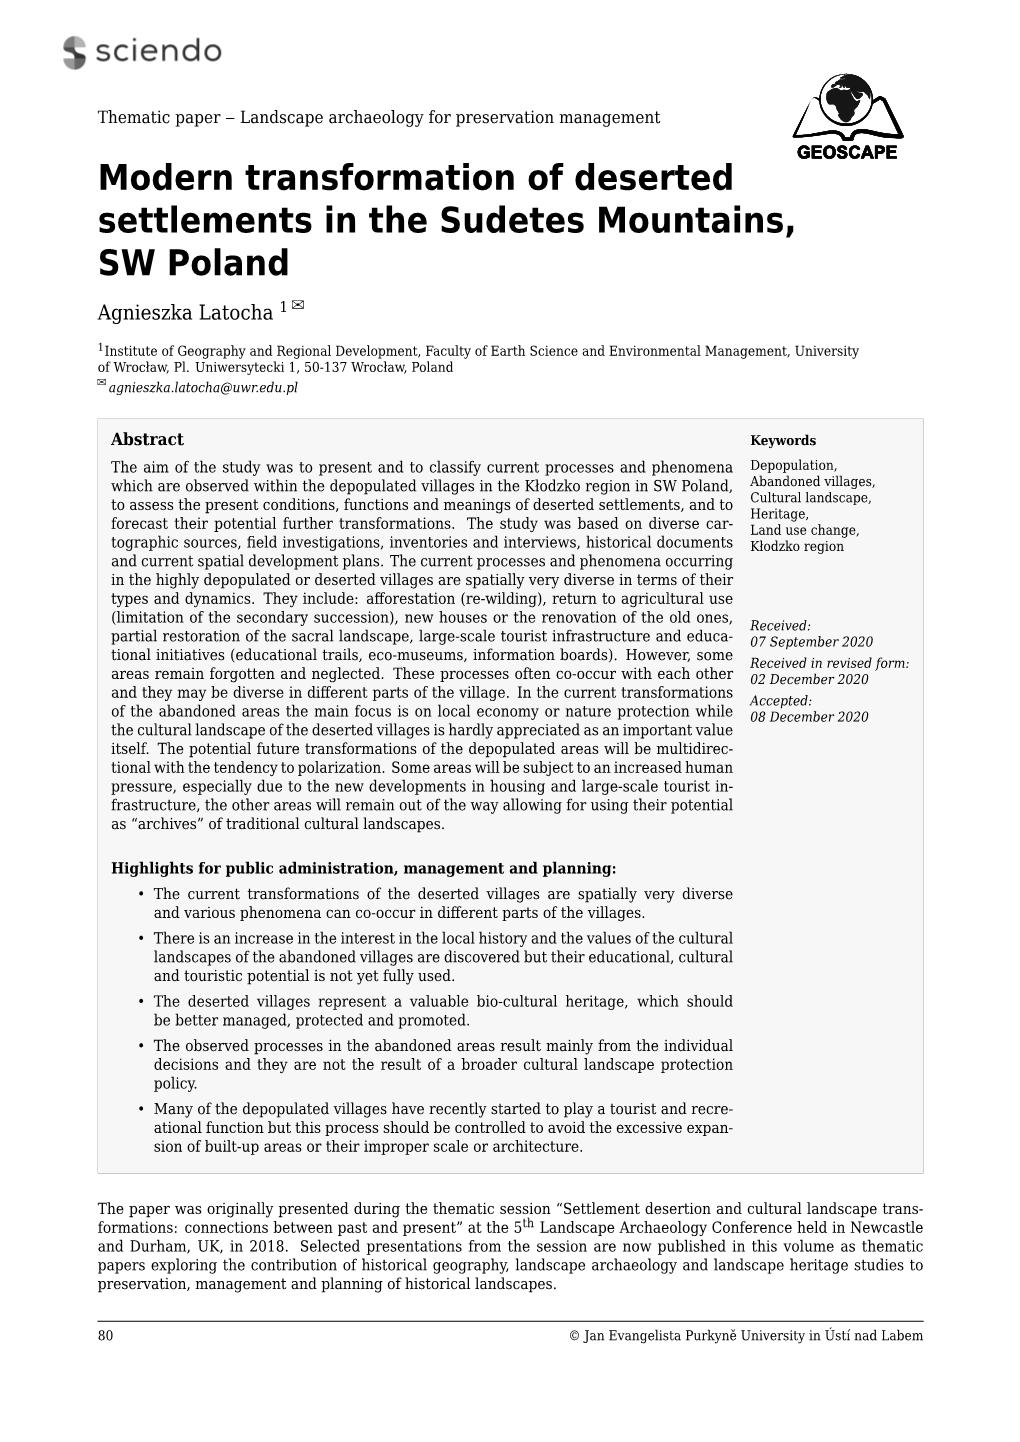 Modern Transformation of Deserted Settlements in the Sudetes Mountains, SW Poland